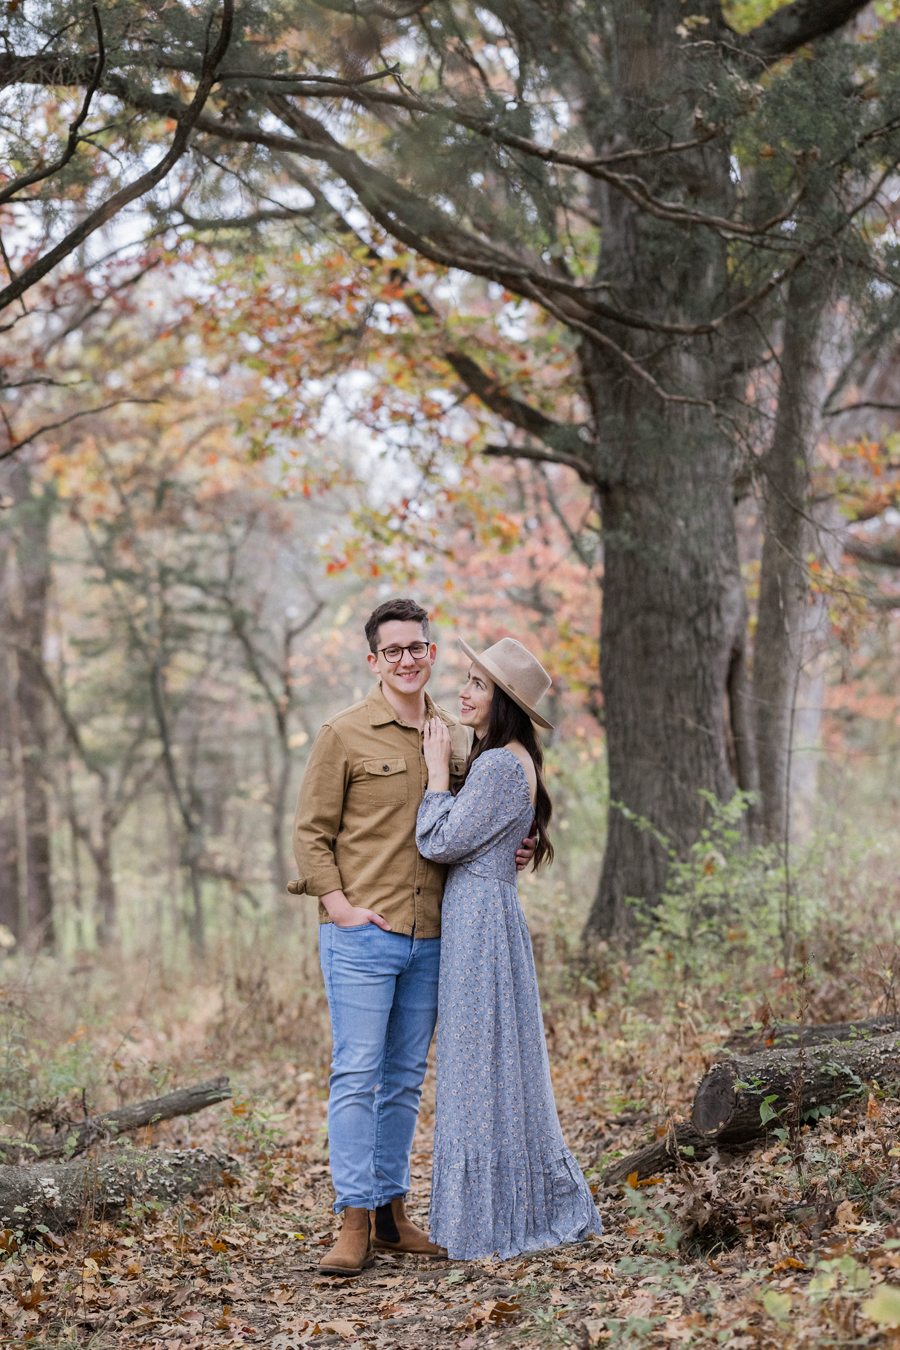 This rainy family portrait session by Missouri photographer Love Tree Studios has all the cozy fall vibes.